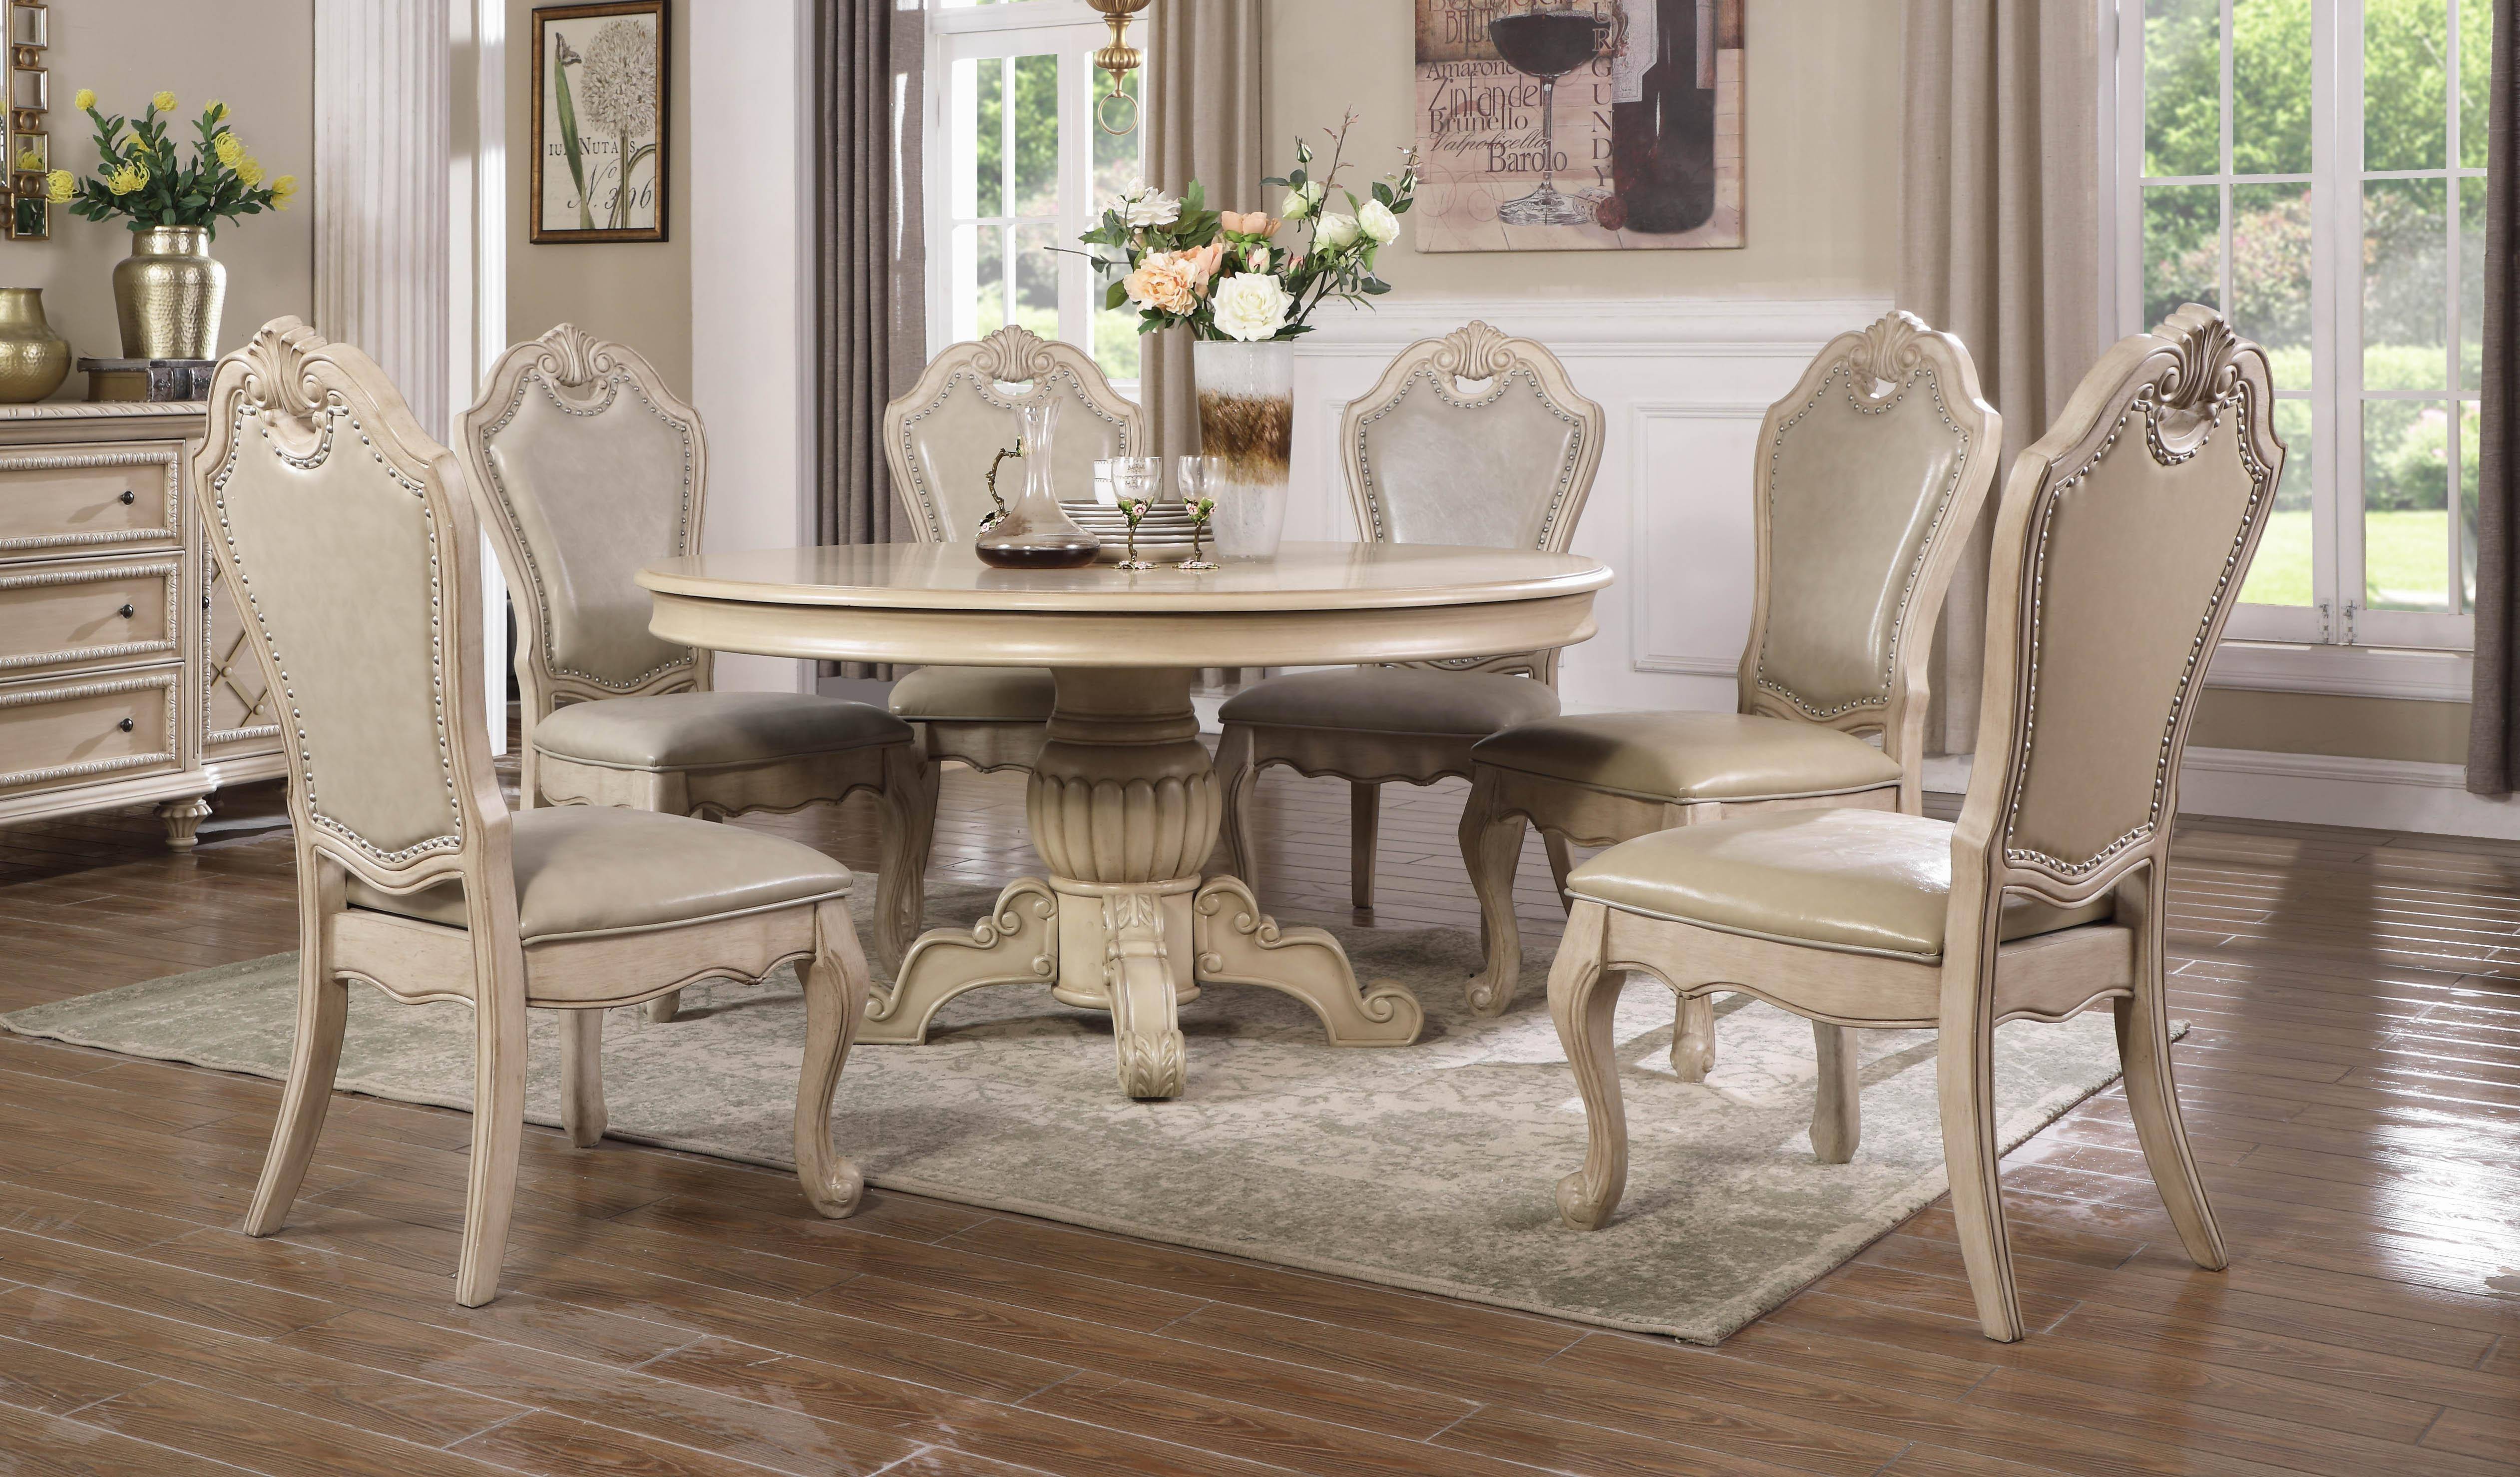 Old World Antique White 7pcs Dining Room Set NEW Rectangular Table & Chairs IACA 